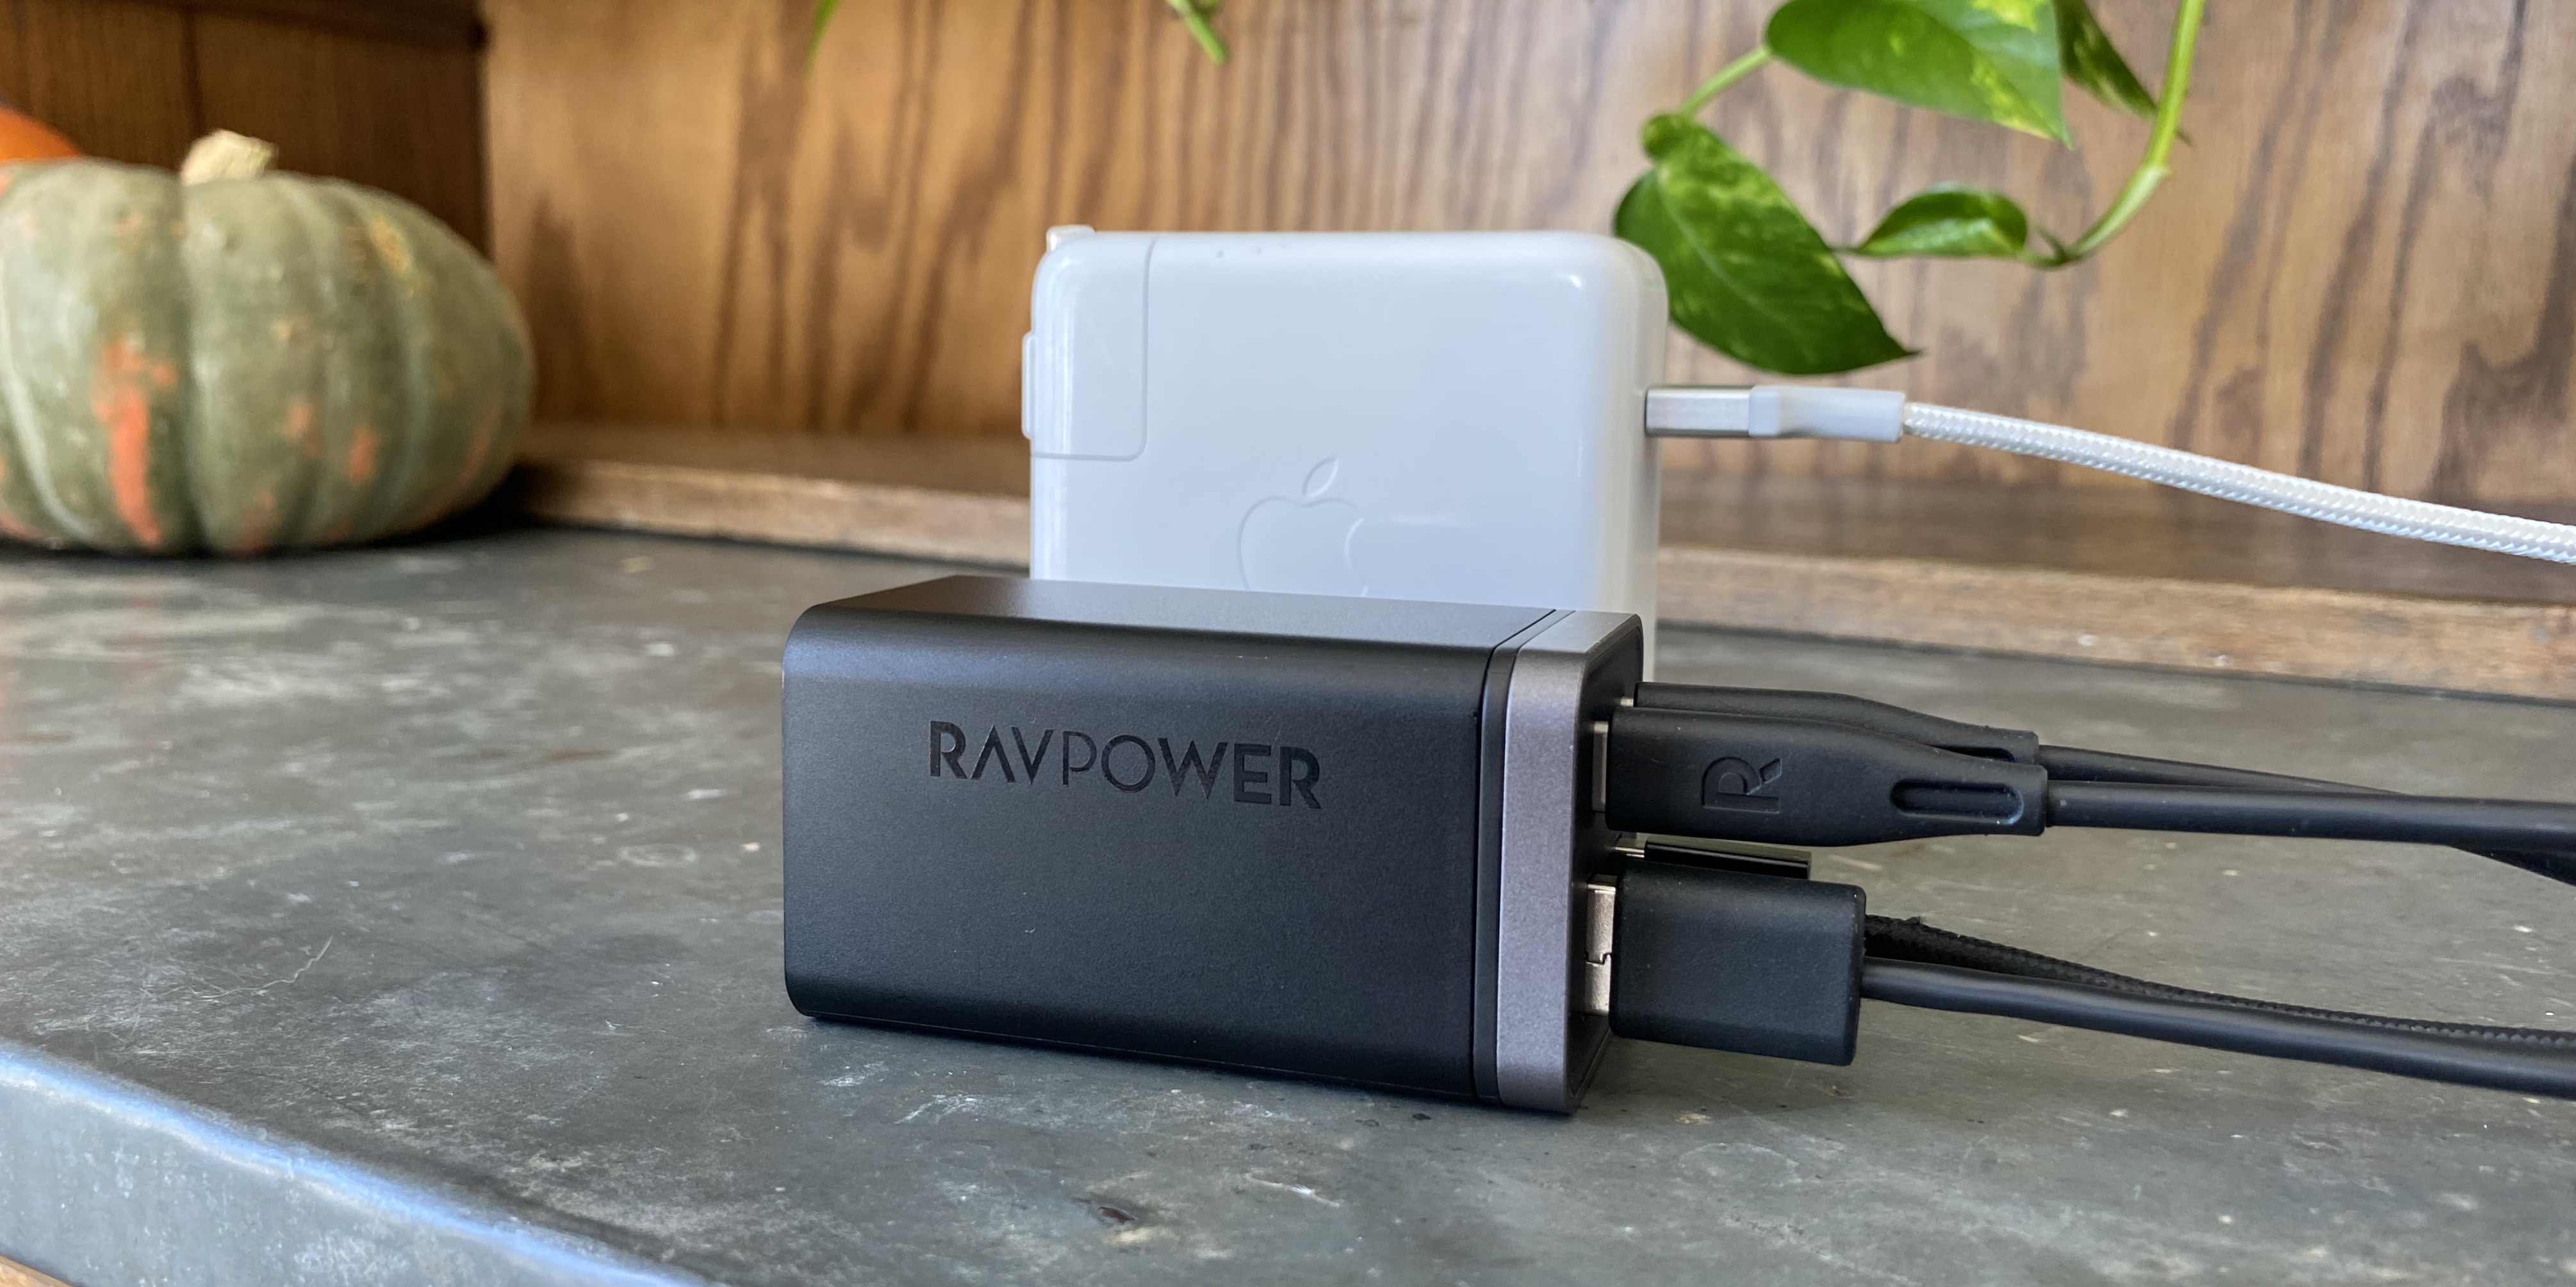 Best multi-device chargers for families with iPhone, iPad –RavPower 65W USB-C Charging Station